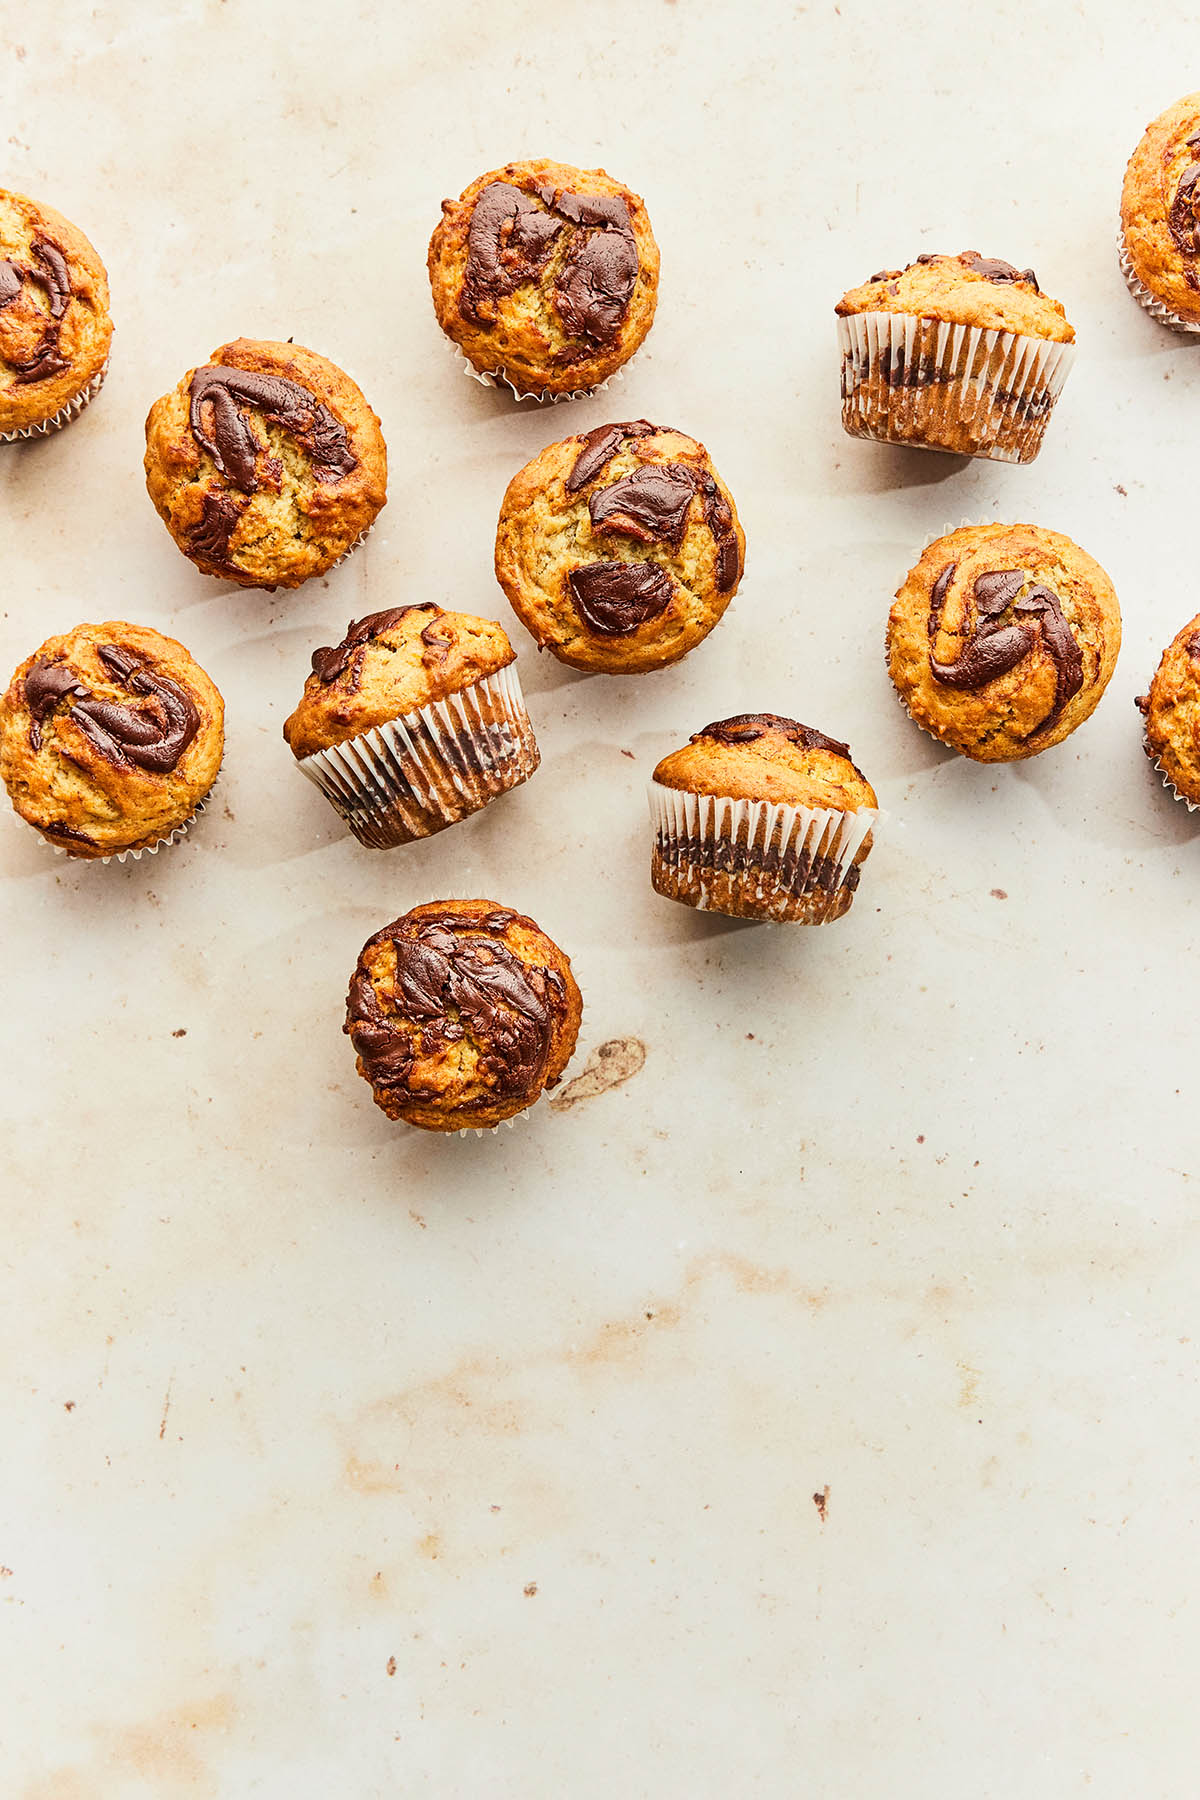 Banana Nutella muffins scattered on a marble surface.